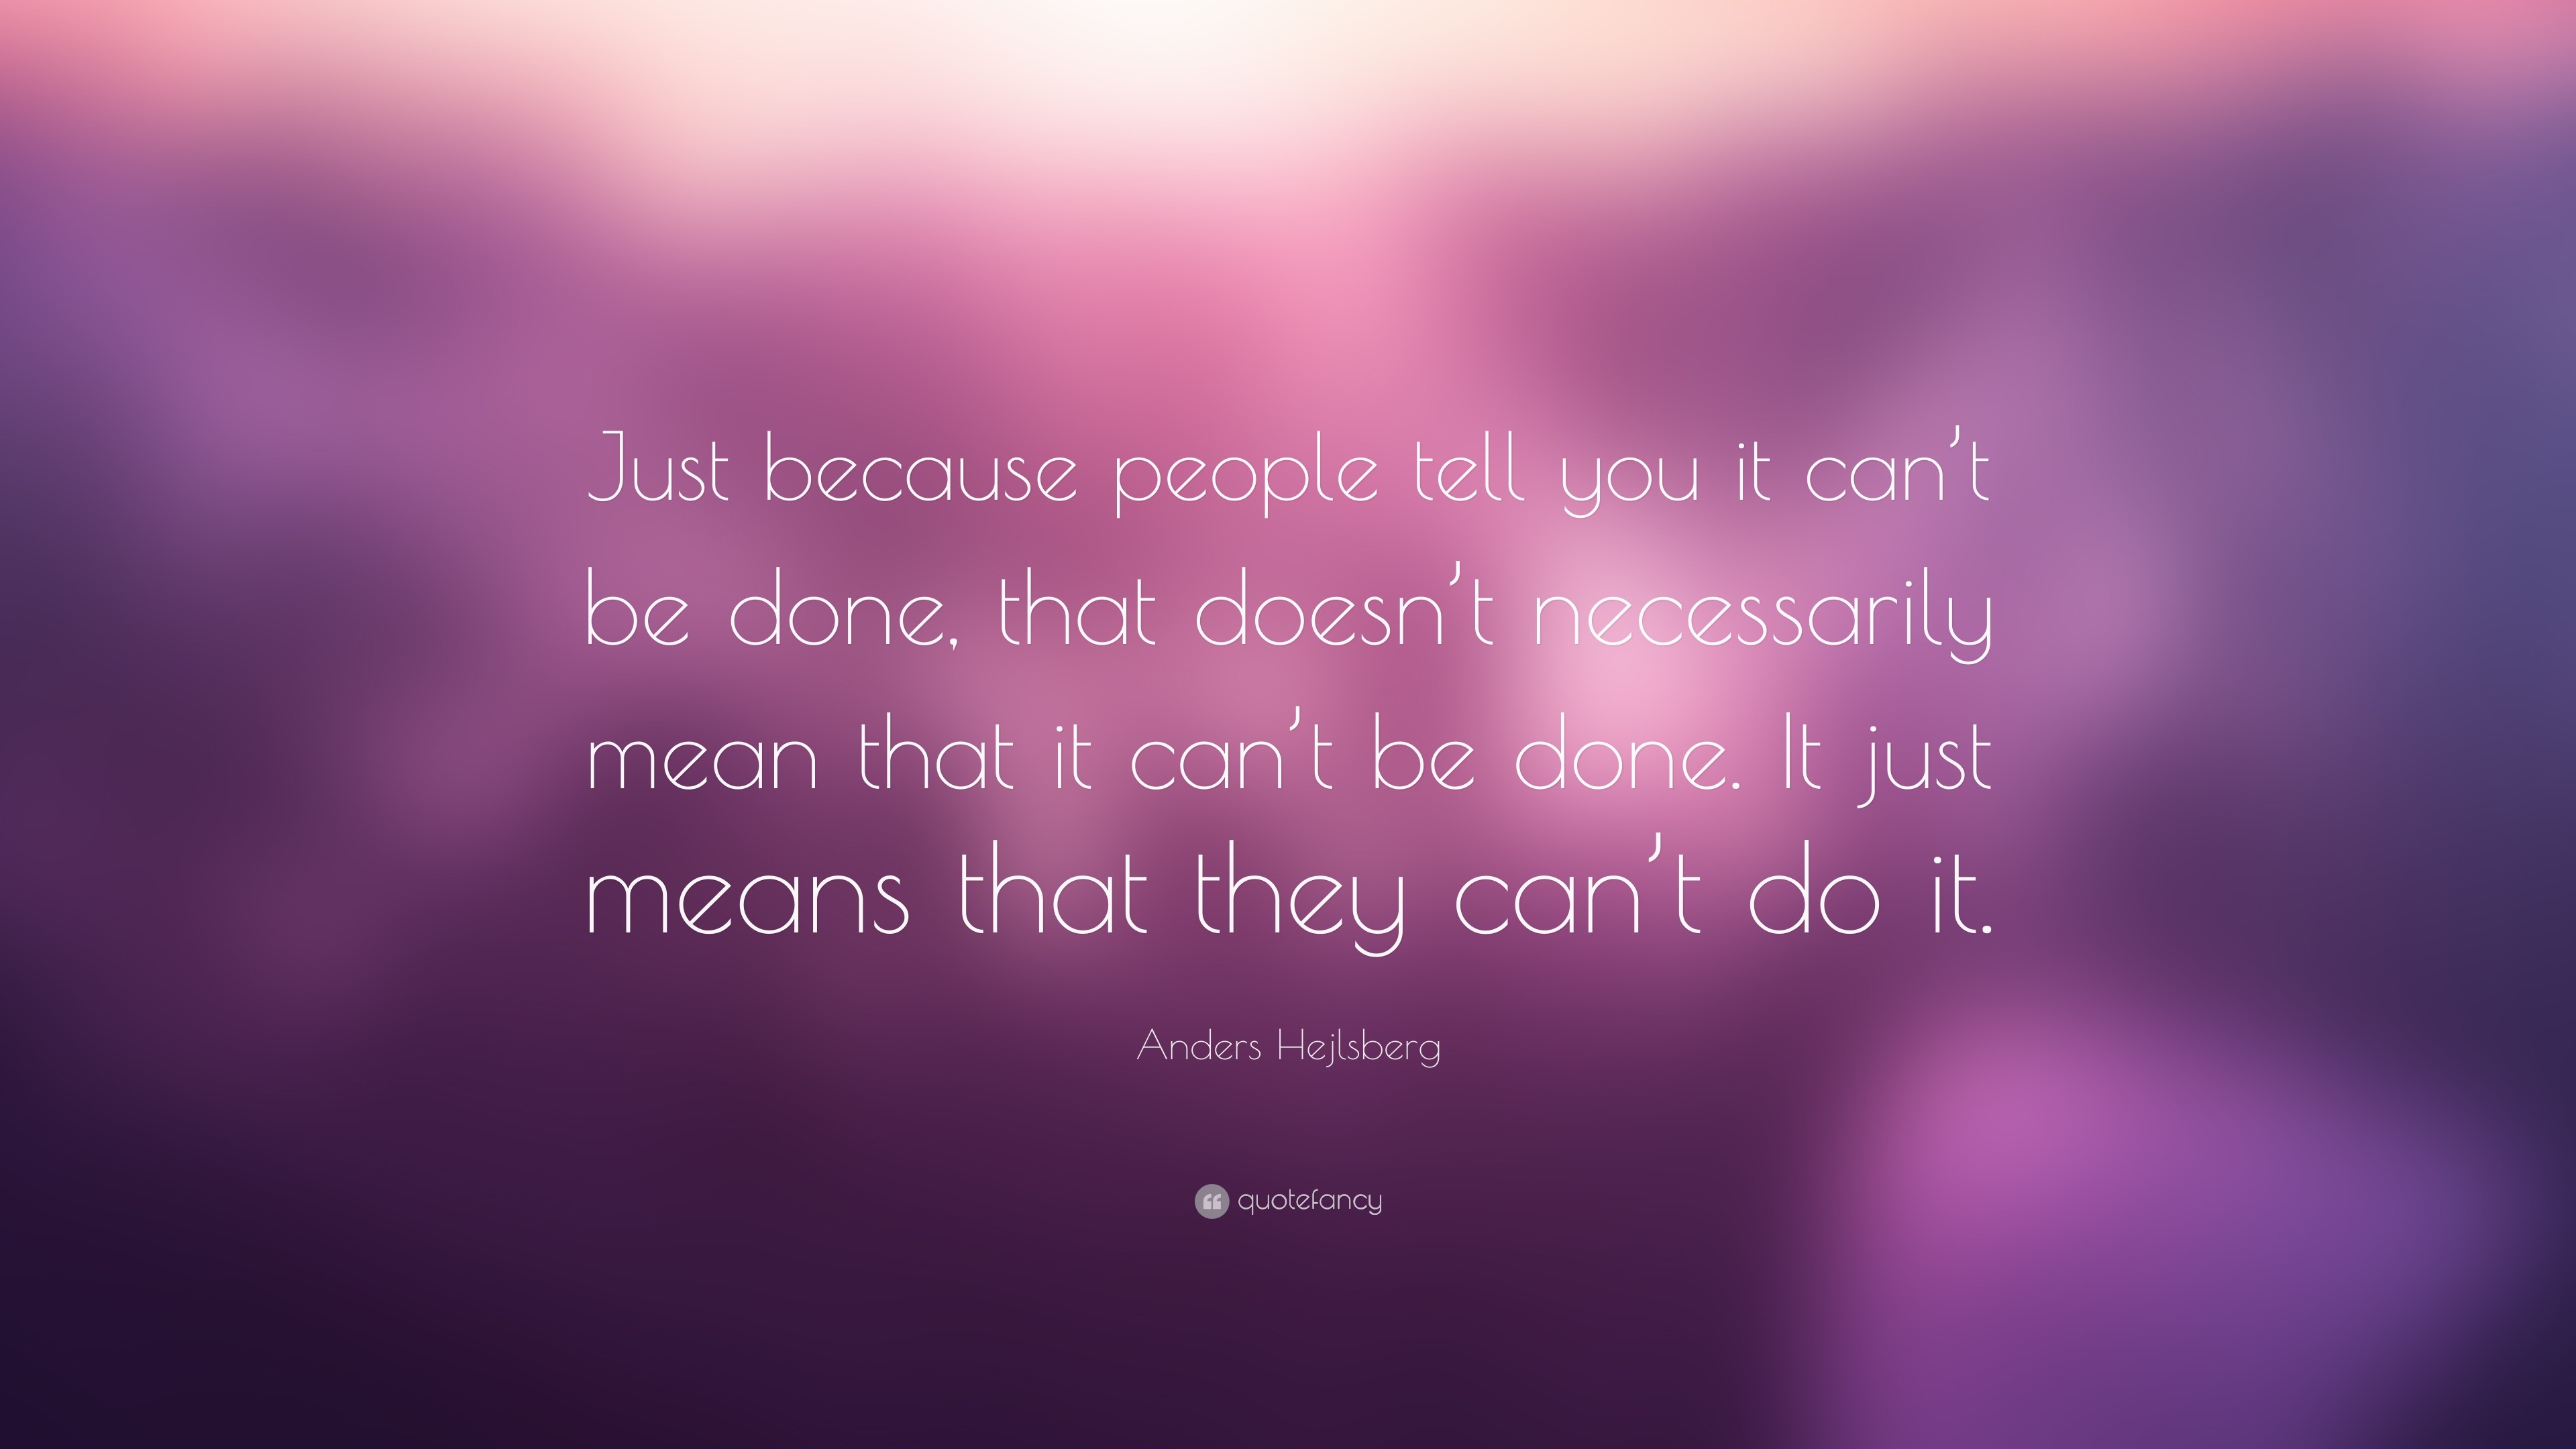 Anders Hejlsberg Quote: “Just because people tell you it can’t be done ...